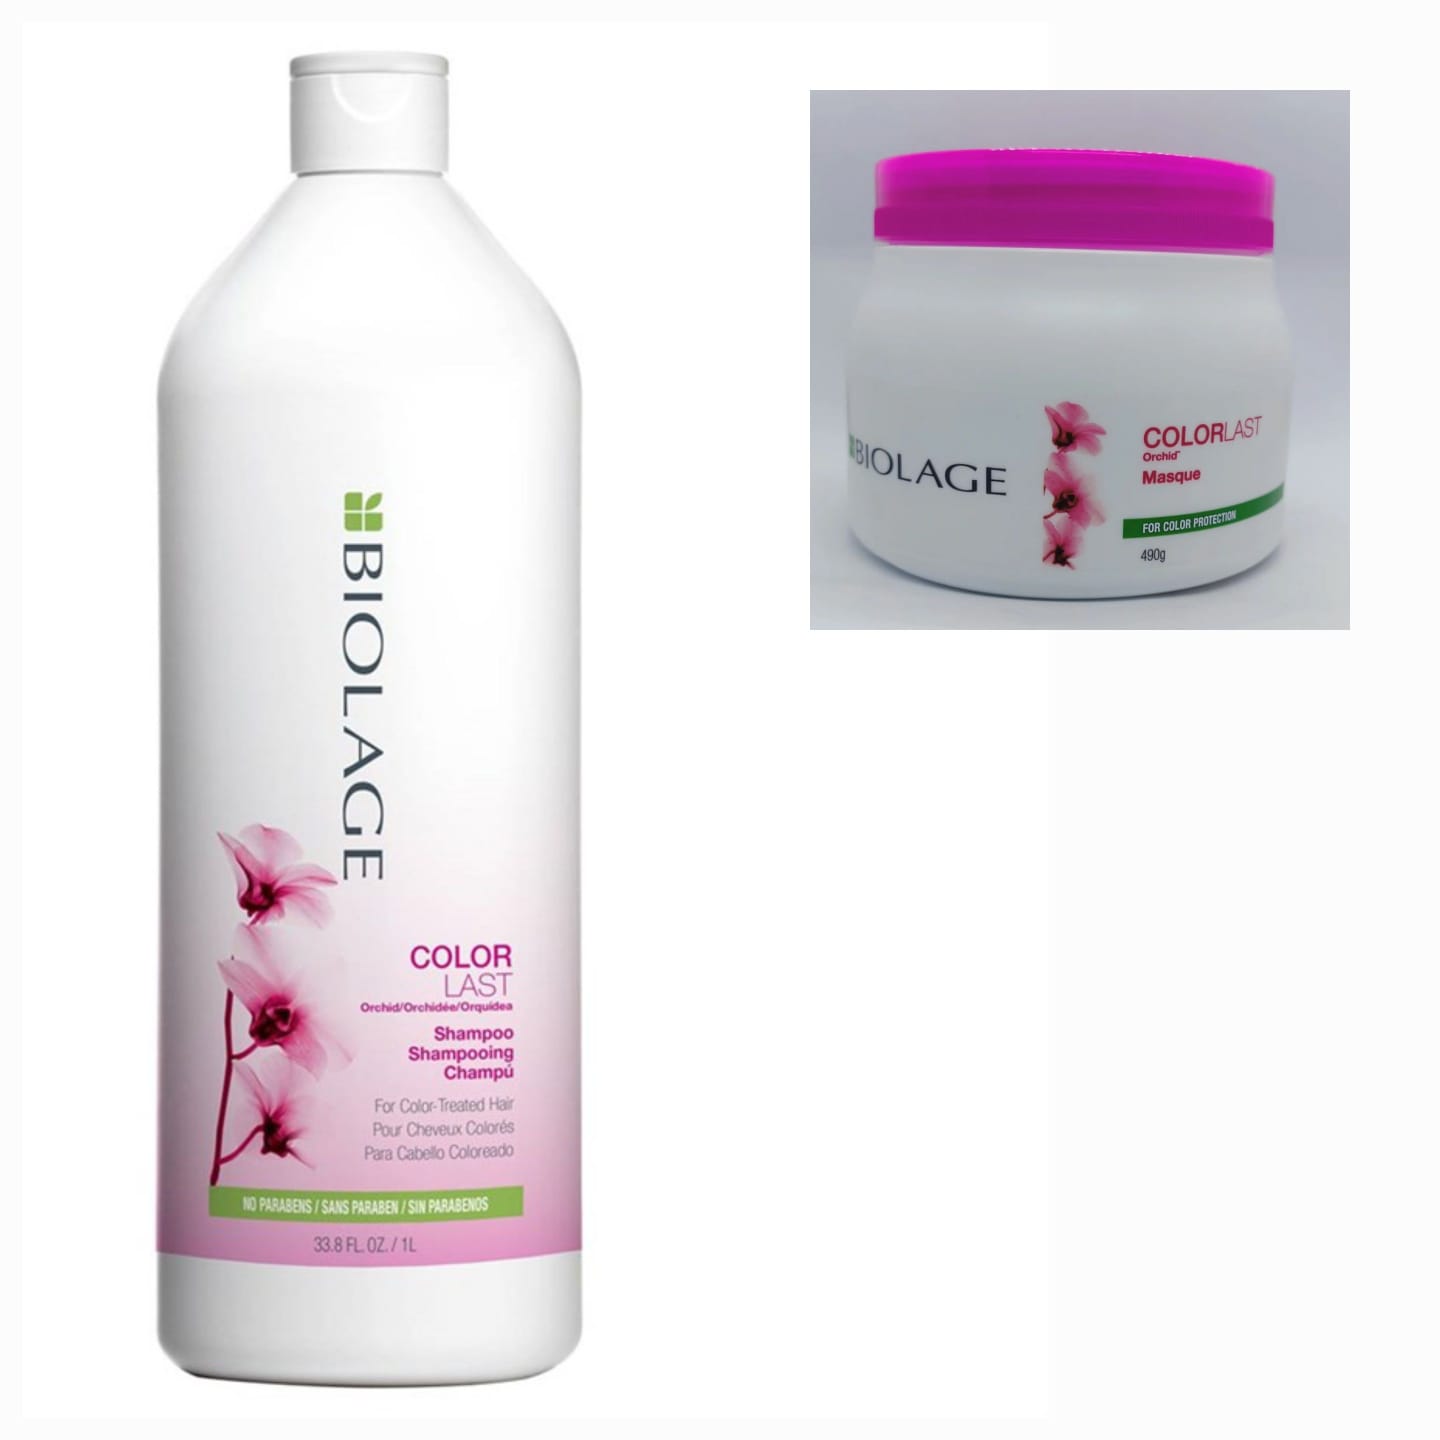 Matrix Biolage ColorLast Color Protecting Masque 490gm and Shampoo 1000ml Combo